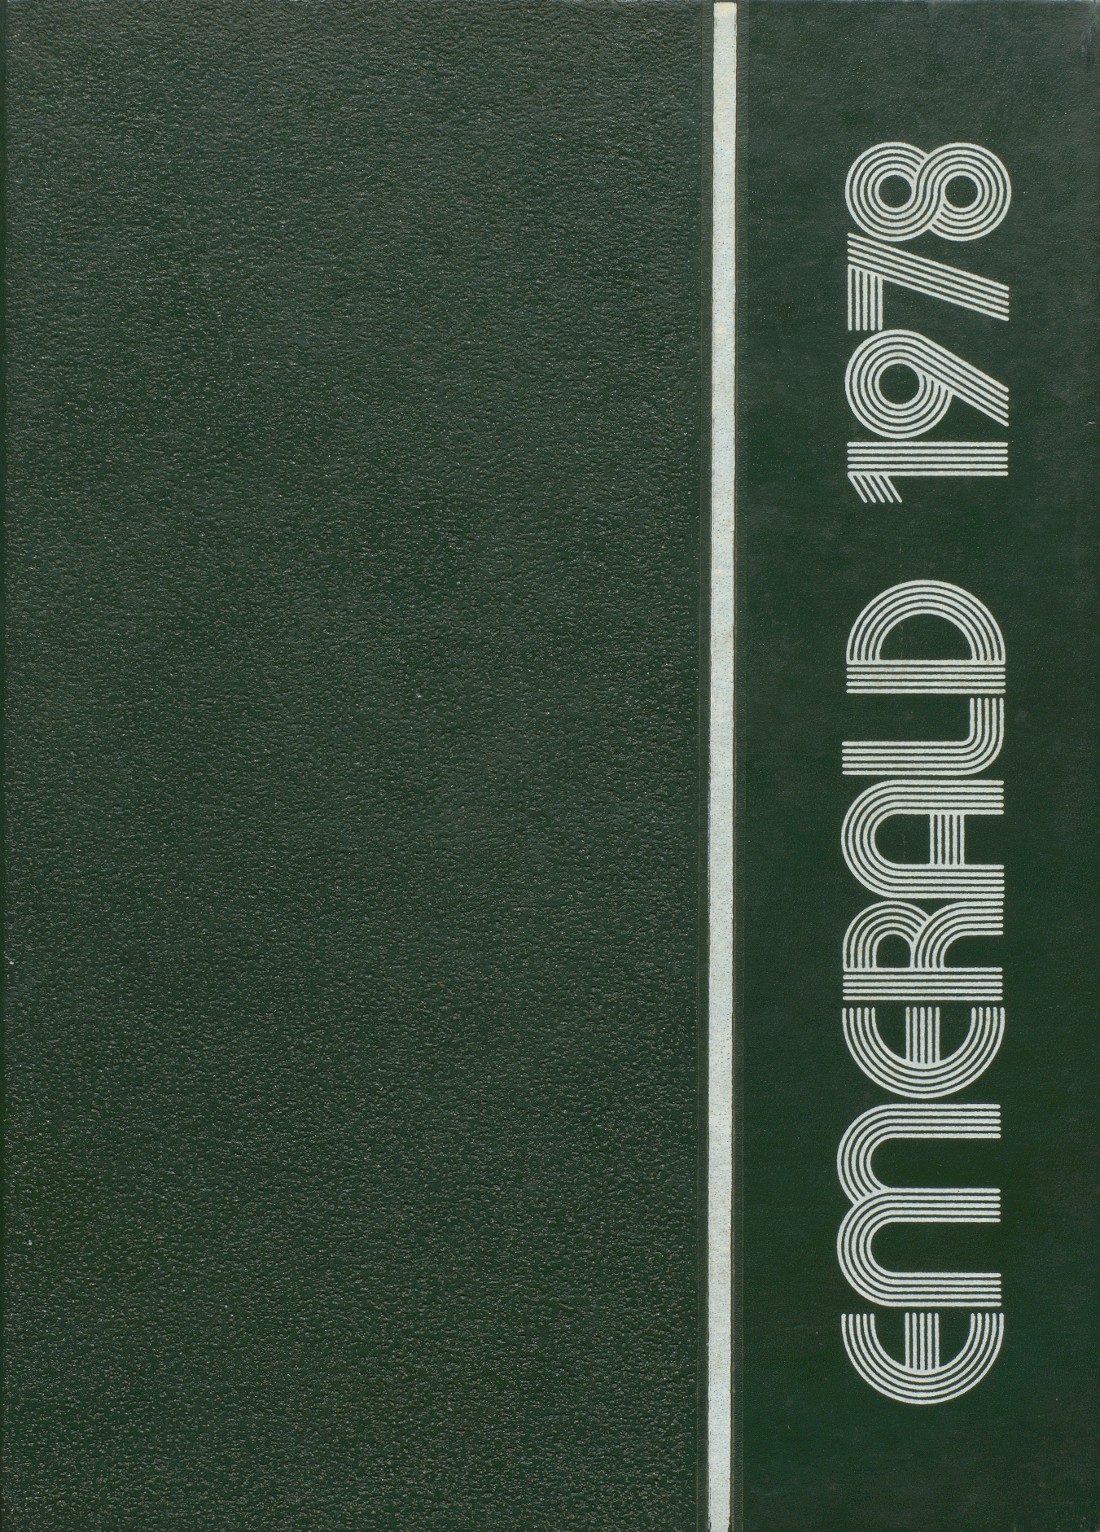 1978 yearbook from East Brunswick High School from East brunswick, New